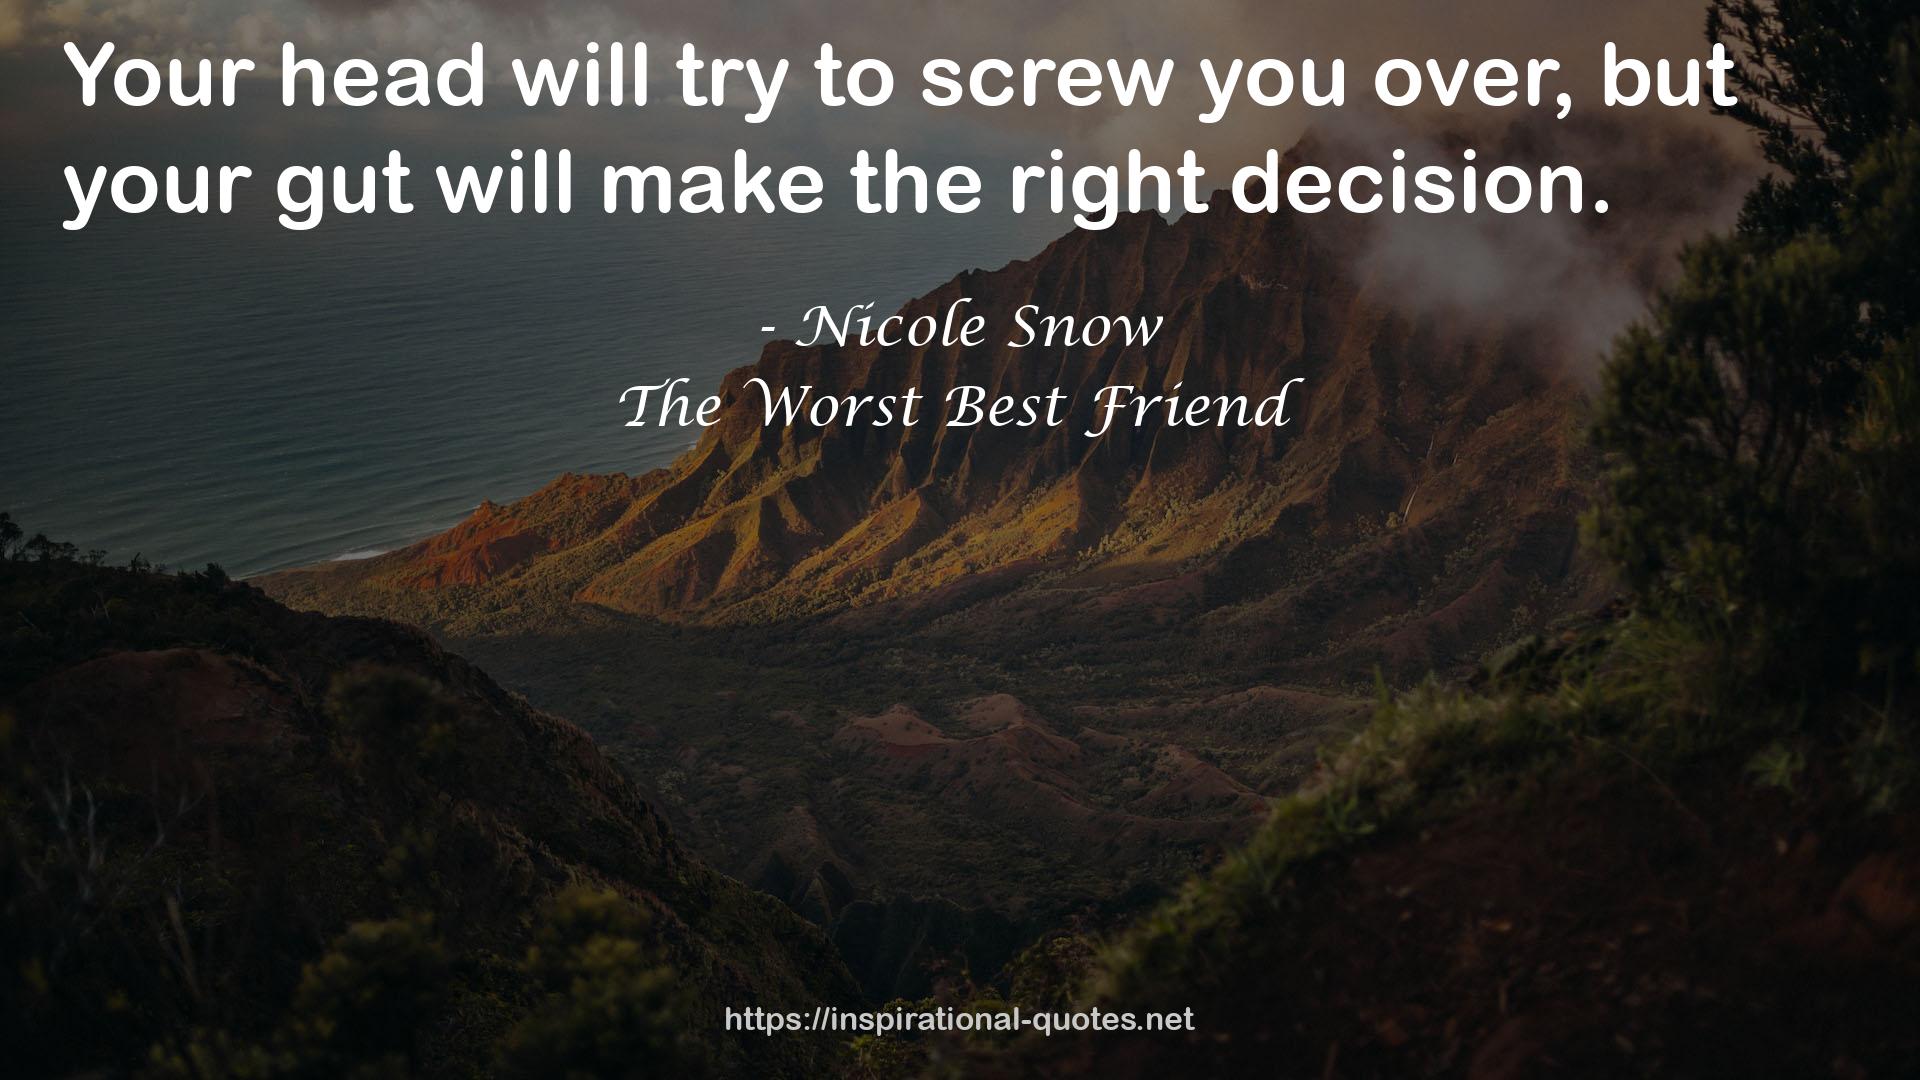 The Worst Best Friend QUOTES